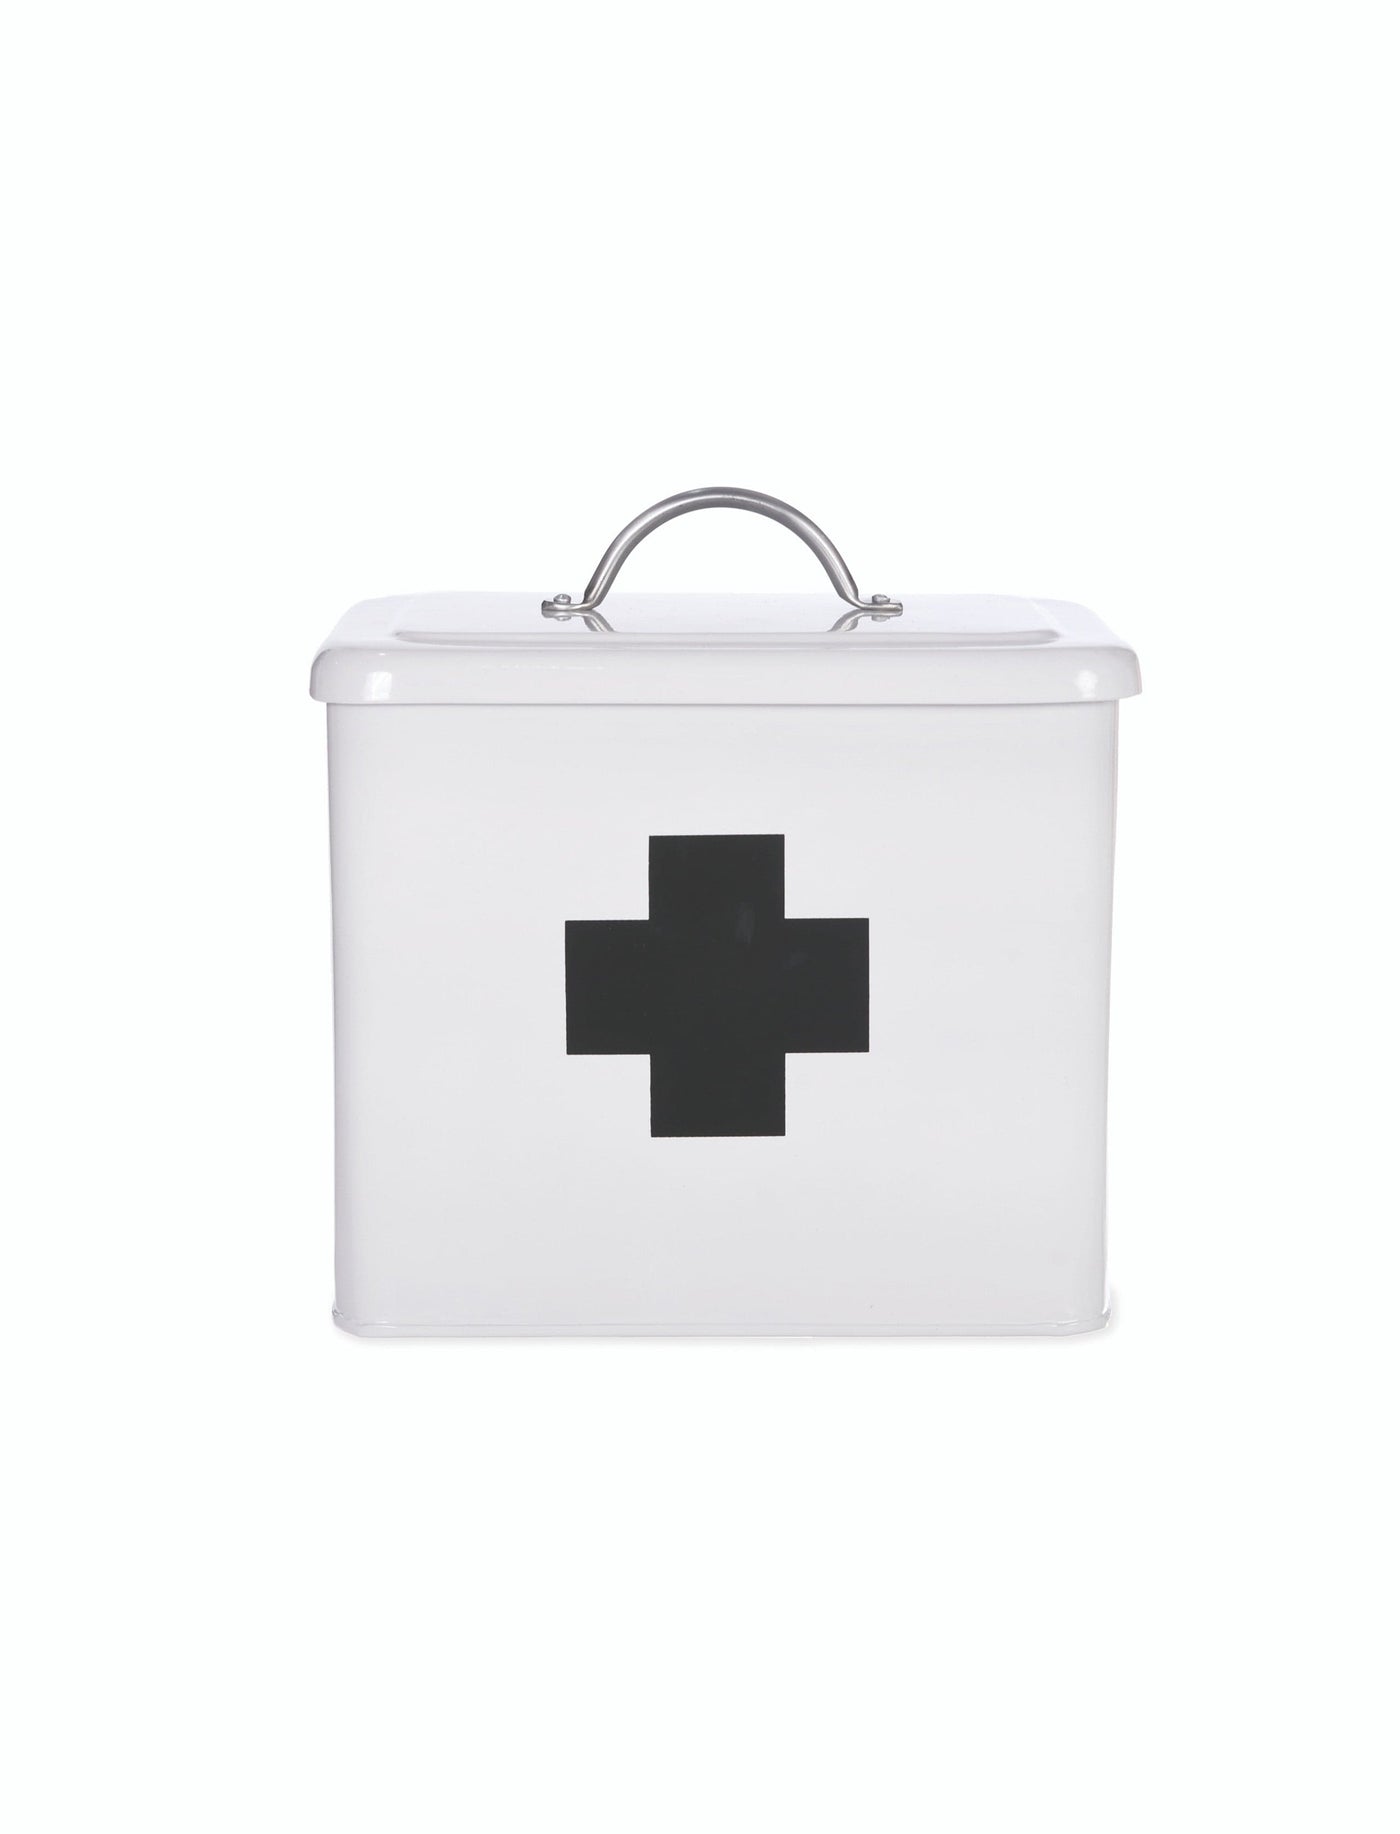 Garden Trading Accessories First Aid Box - Chalk House of Isabella UK